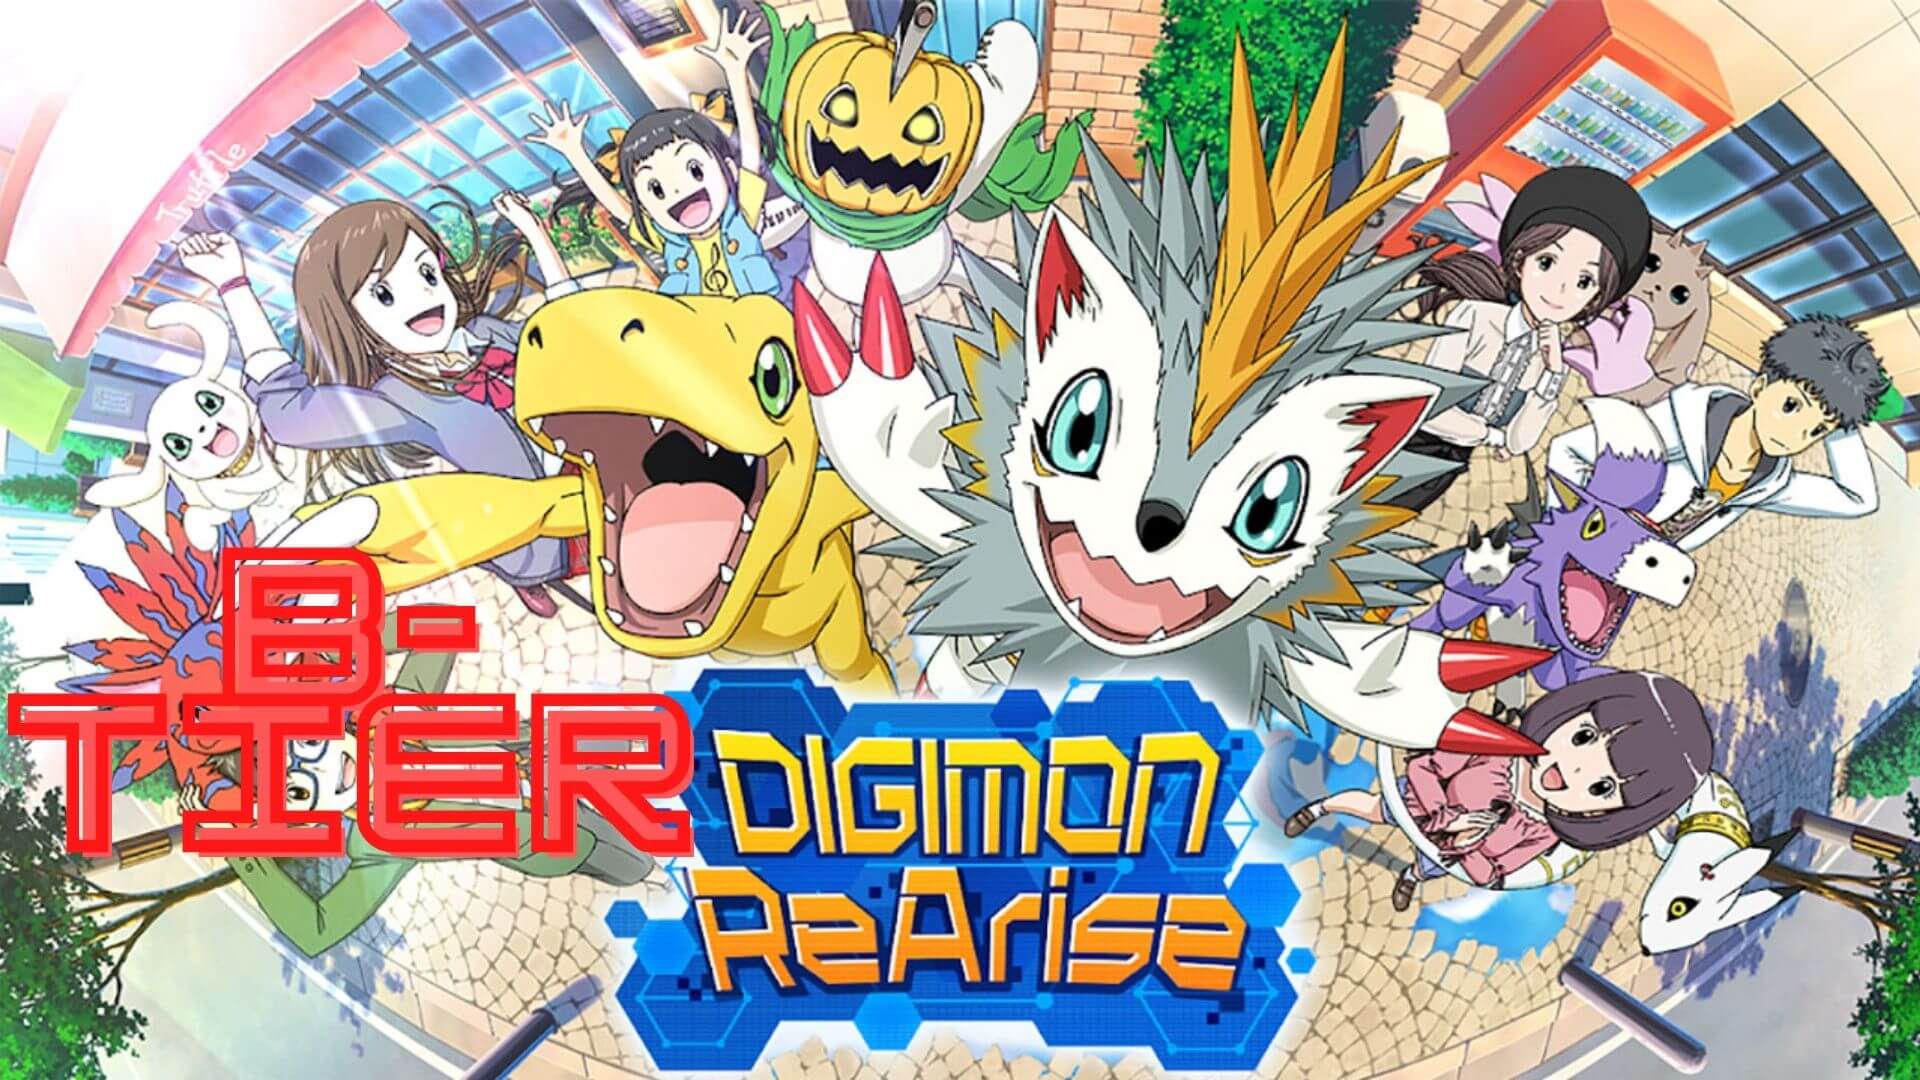 Average characters ranked in Digimon rearise